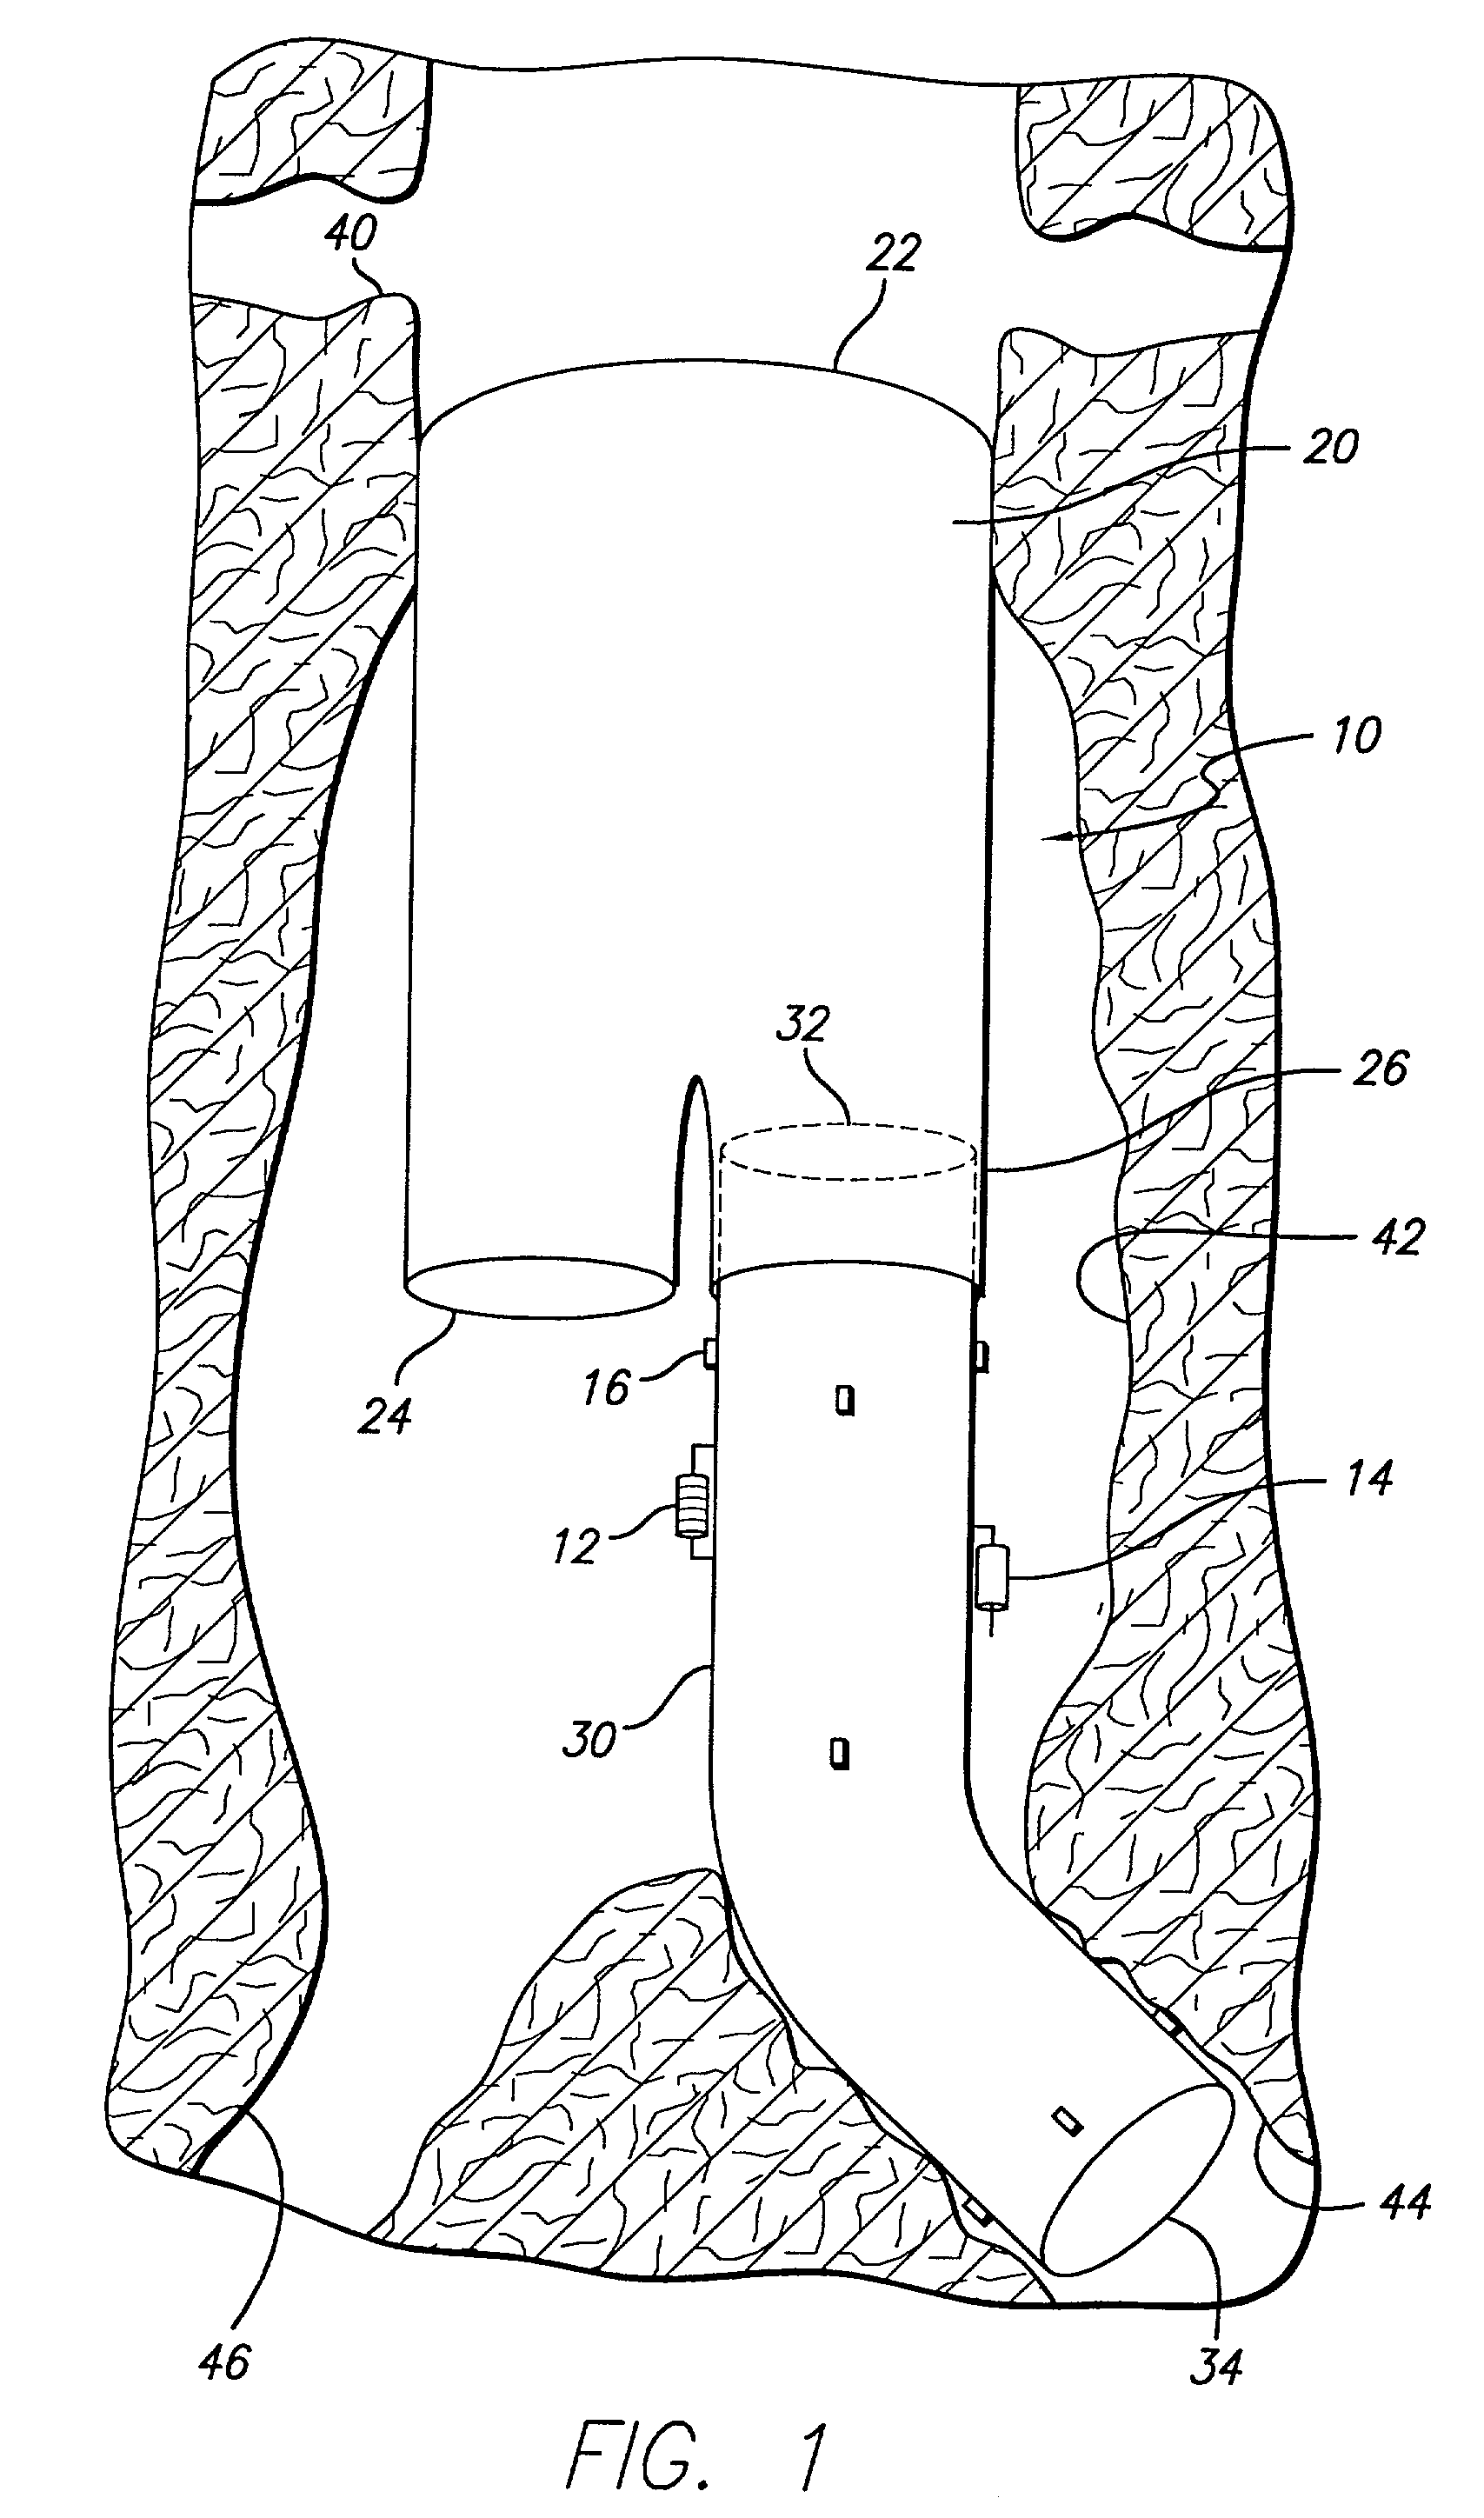 Endovascular graft with sensors design and attachment methods